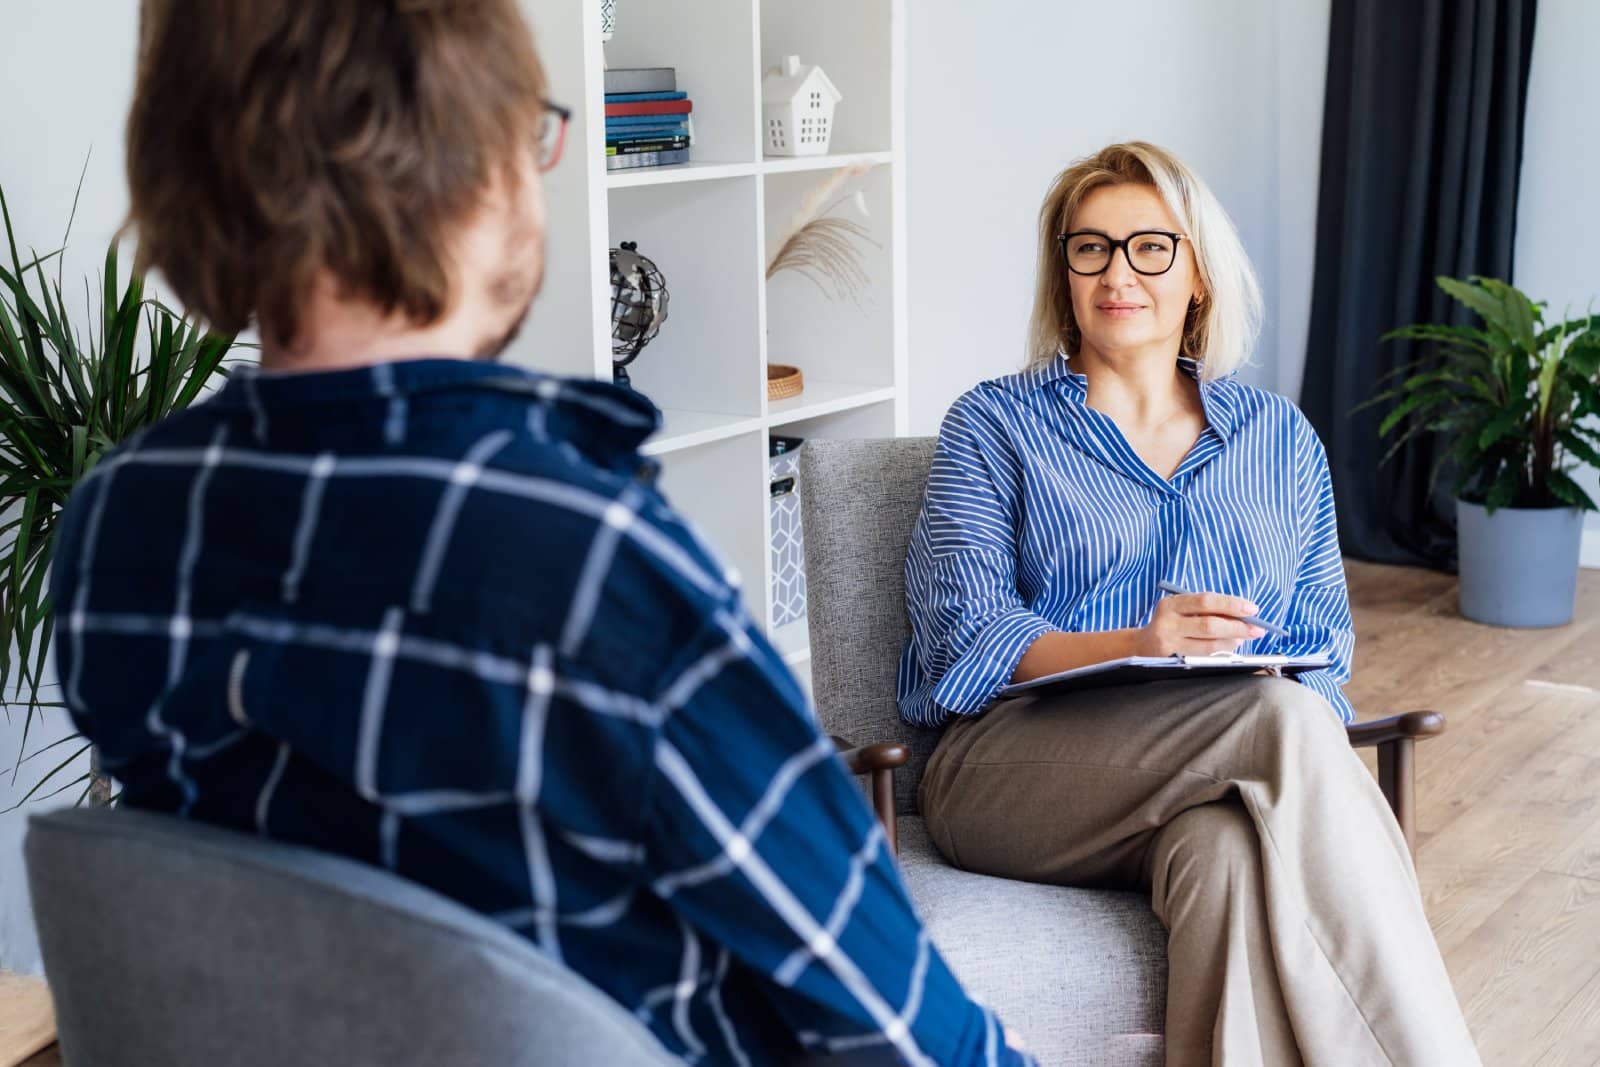 <p class="wp-caption-text">Image Credit: Shutterstock / Okrasiuk</p>  <p><span>Recognize when family communication challenges require professional intervention and seek guidance from family therapists, counselors, or mediators trained in conflict resolution and communication skills.</span></p>